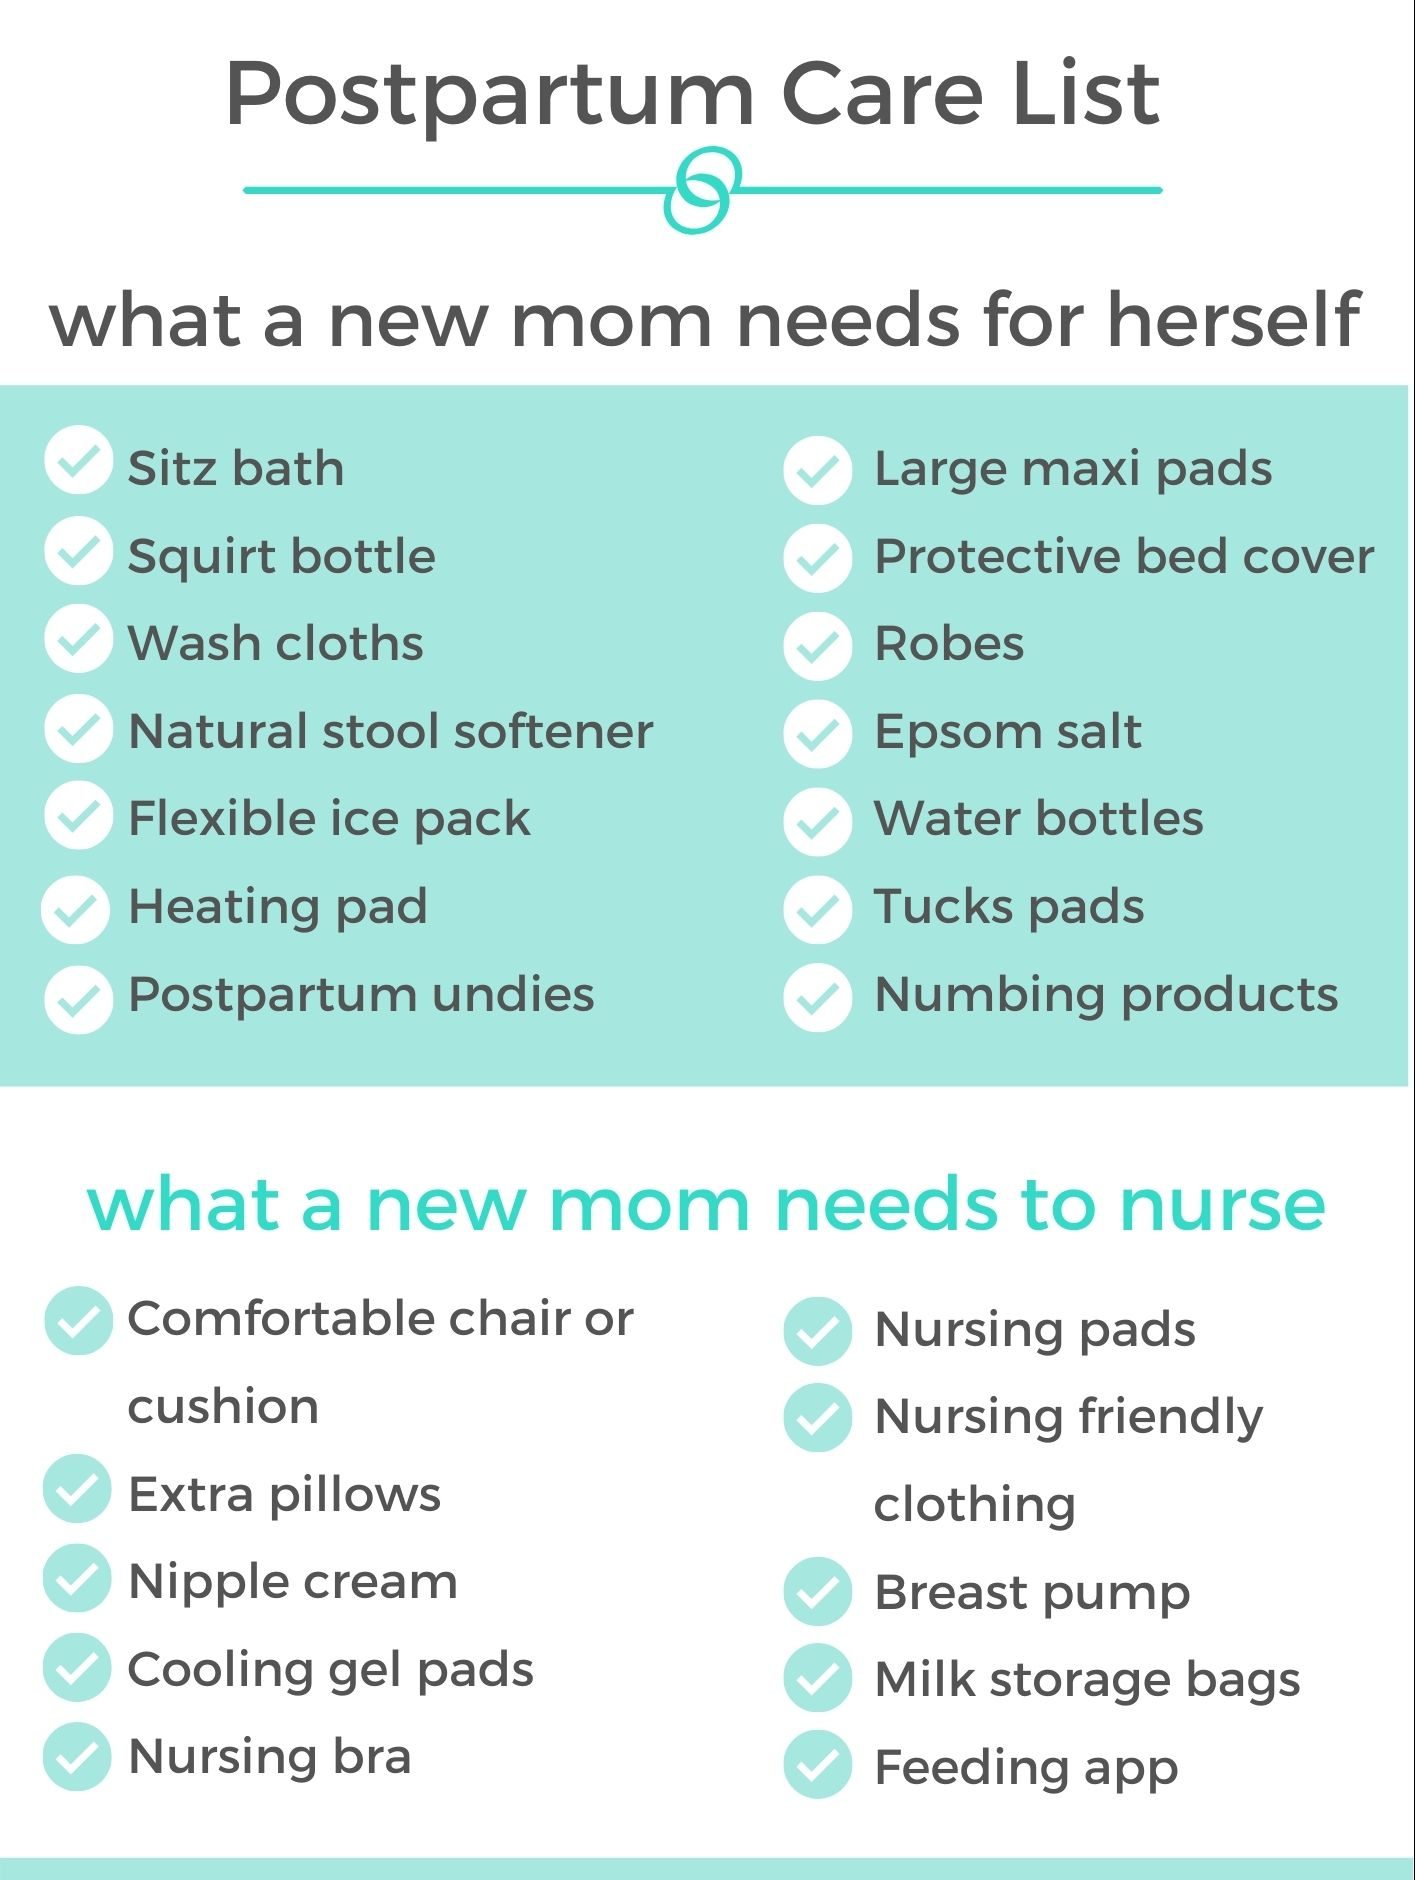 5 Postpartum Recovery Tips for New Moms, Spirit of Health